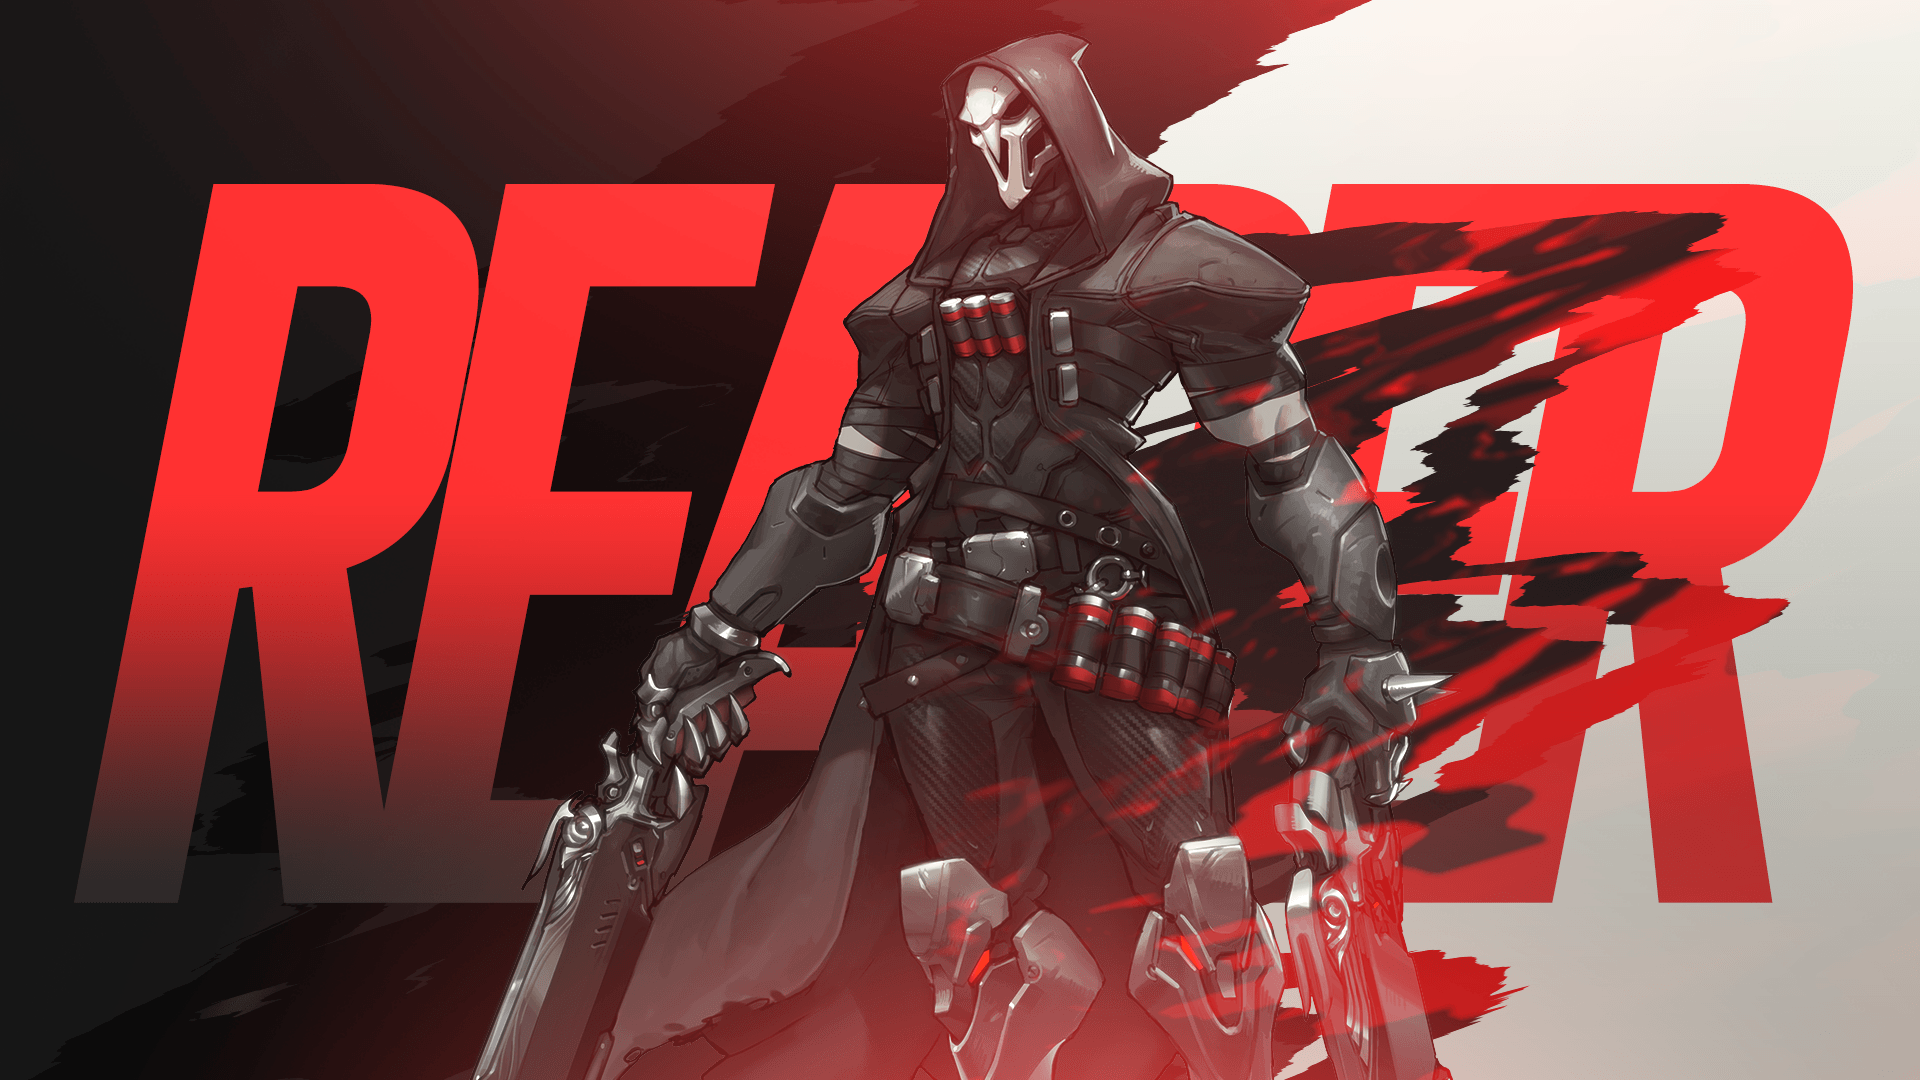 Reaper Overwatch Wallpaper HD Games 4K Wallpapers Images and Background   Wallpapers Den